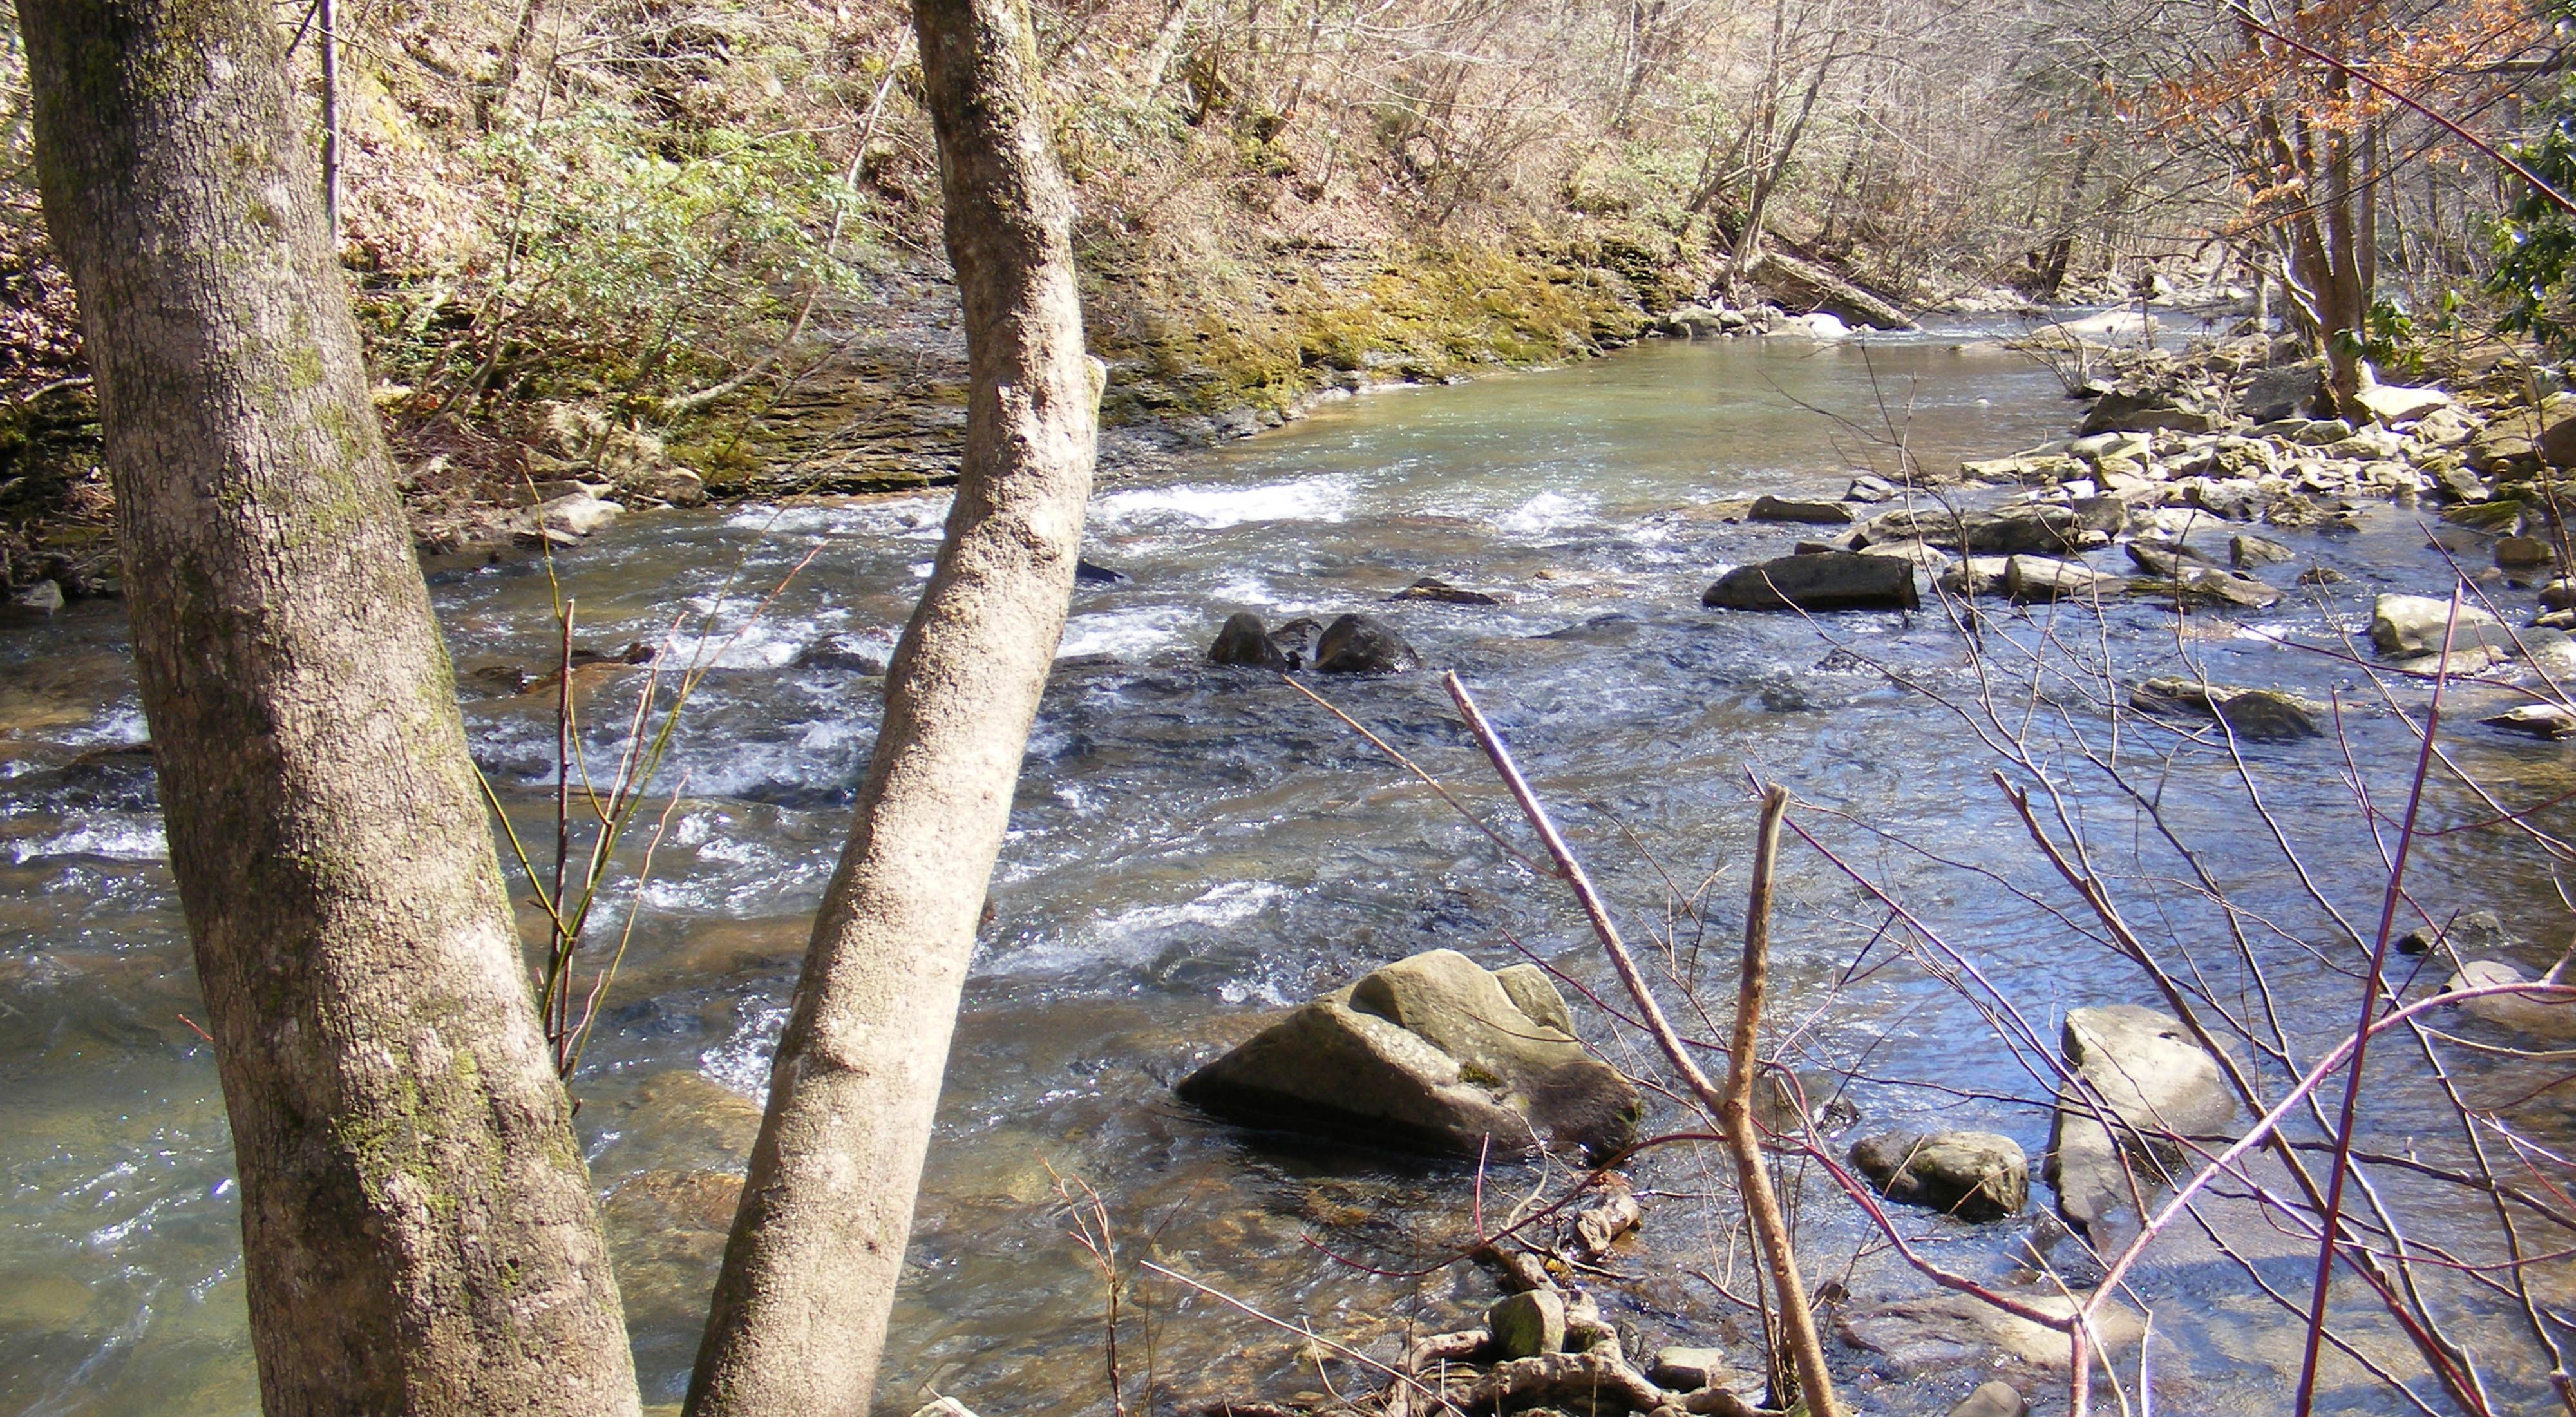 Clifty Creek Preserve, located beside the Emory River.